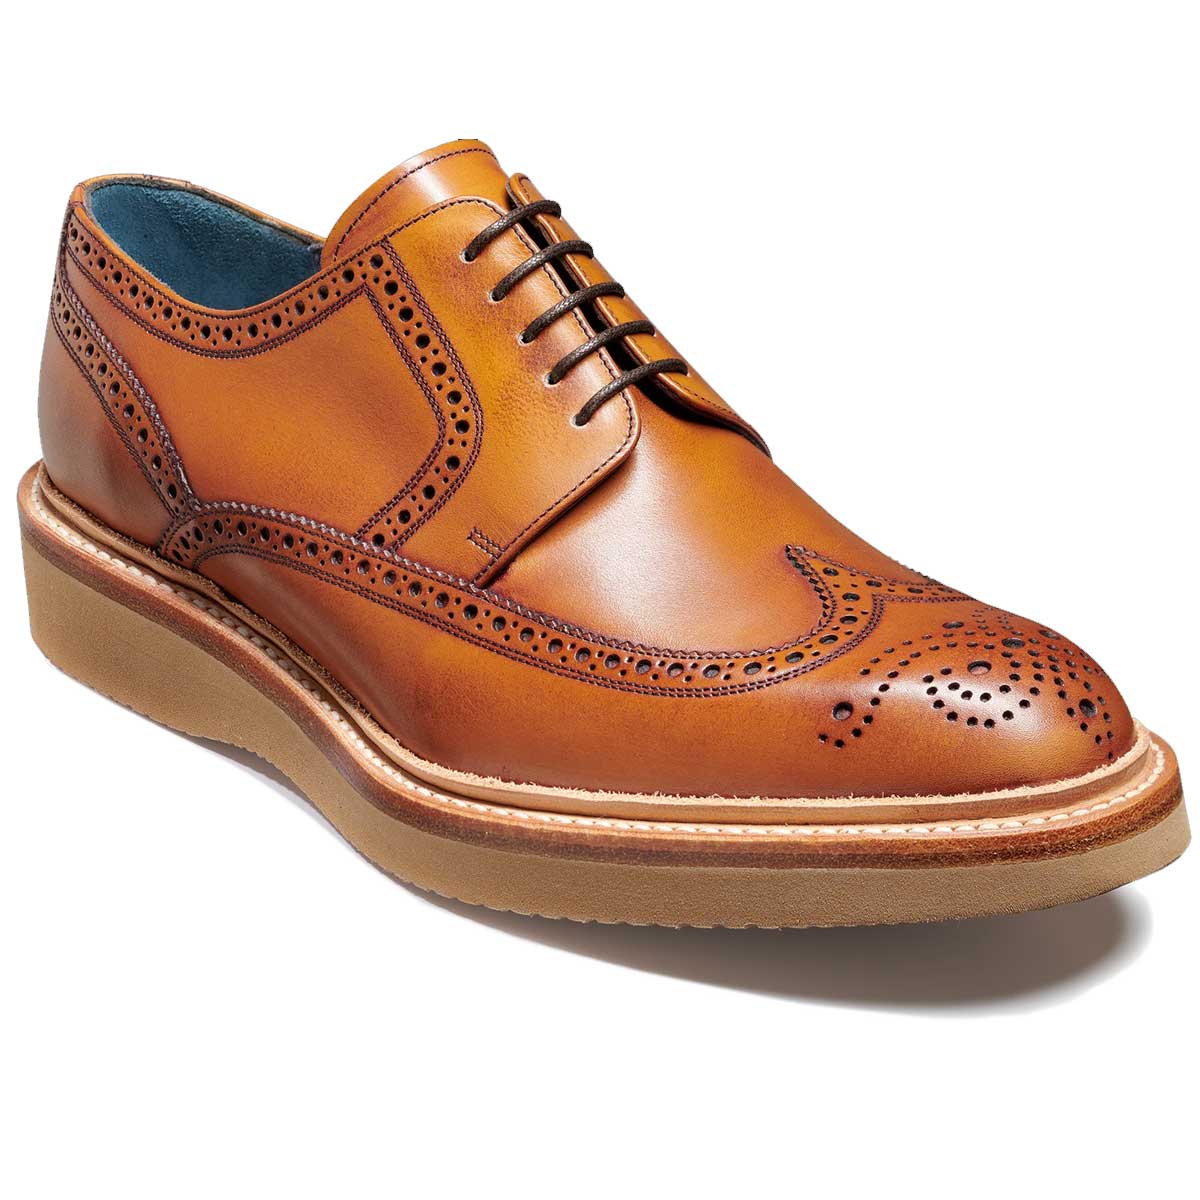 BARKER Bill Shoes - Mens Derby Brogues - Rosewood Hand Painted